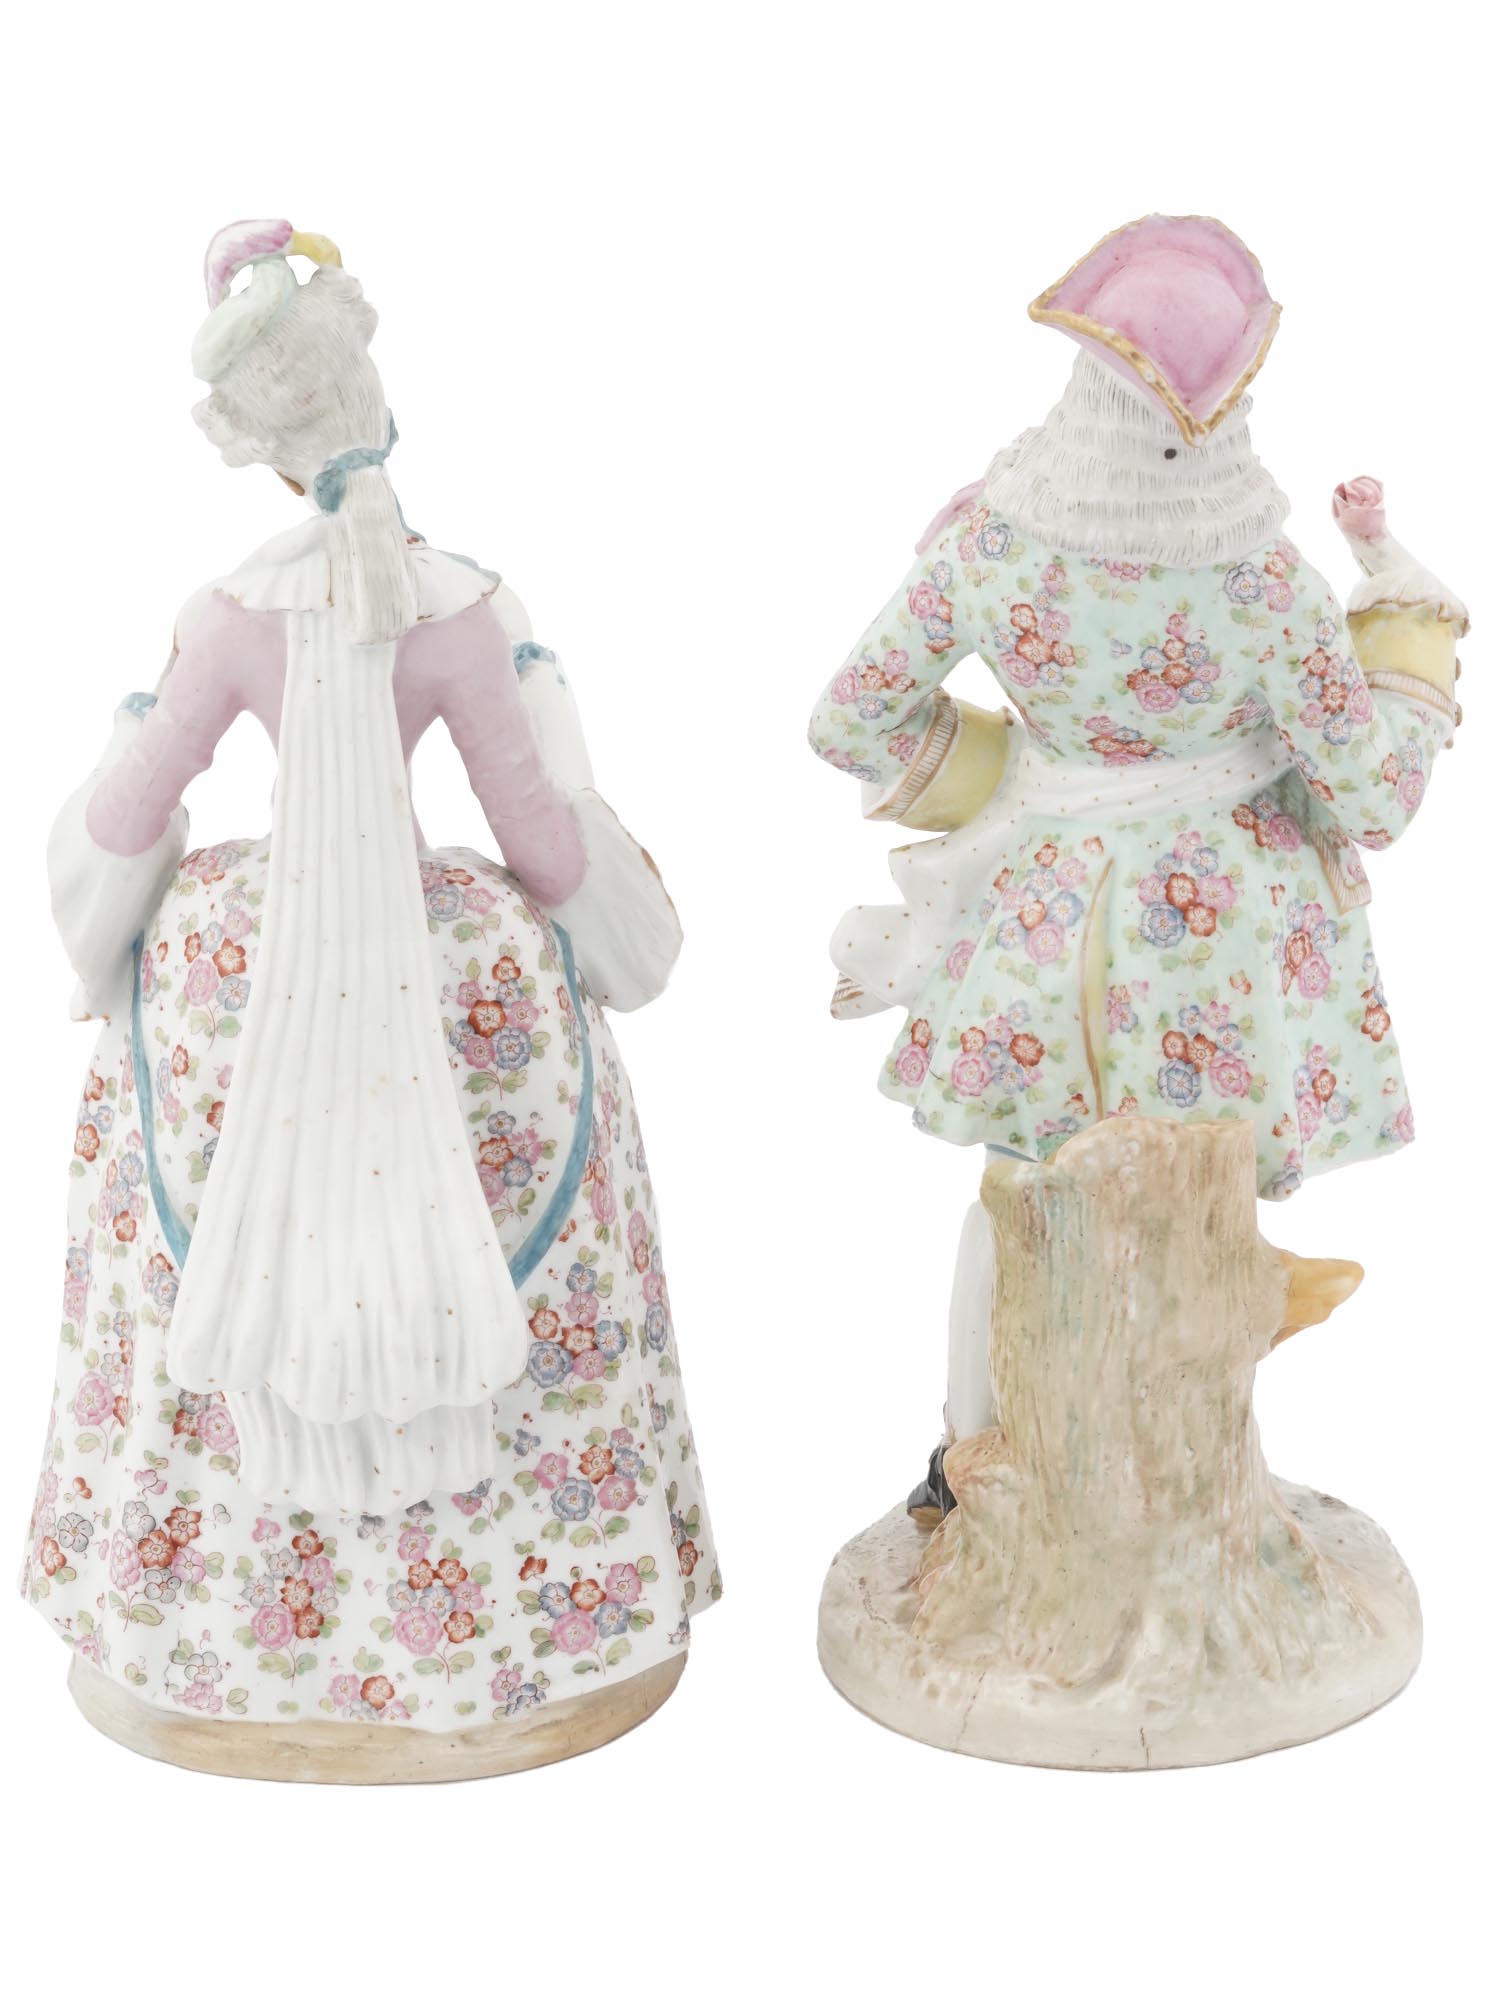 GERMAN ROCOCO PORCELAIN FIGURINES BY MEISSEN PIC-3